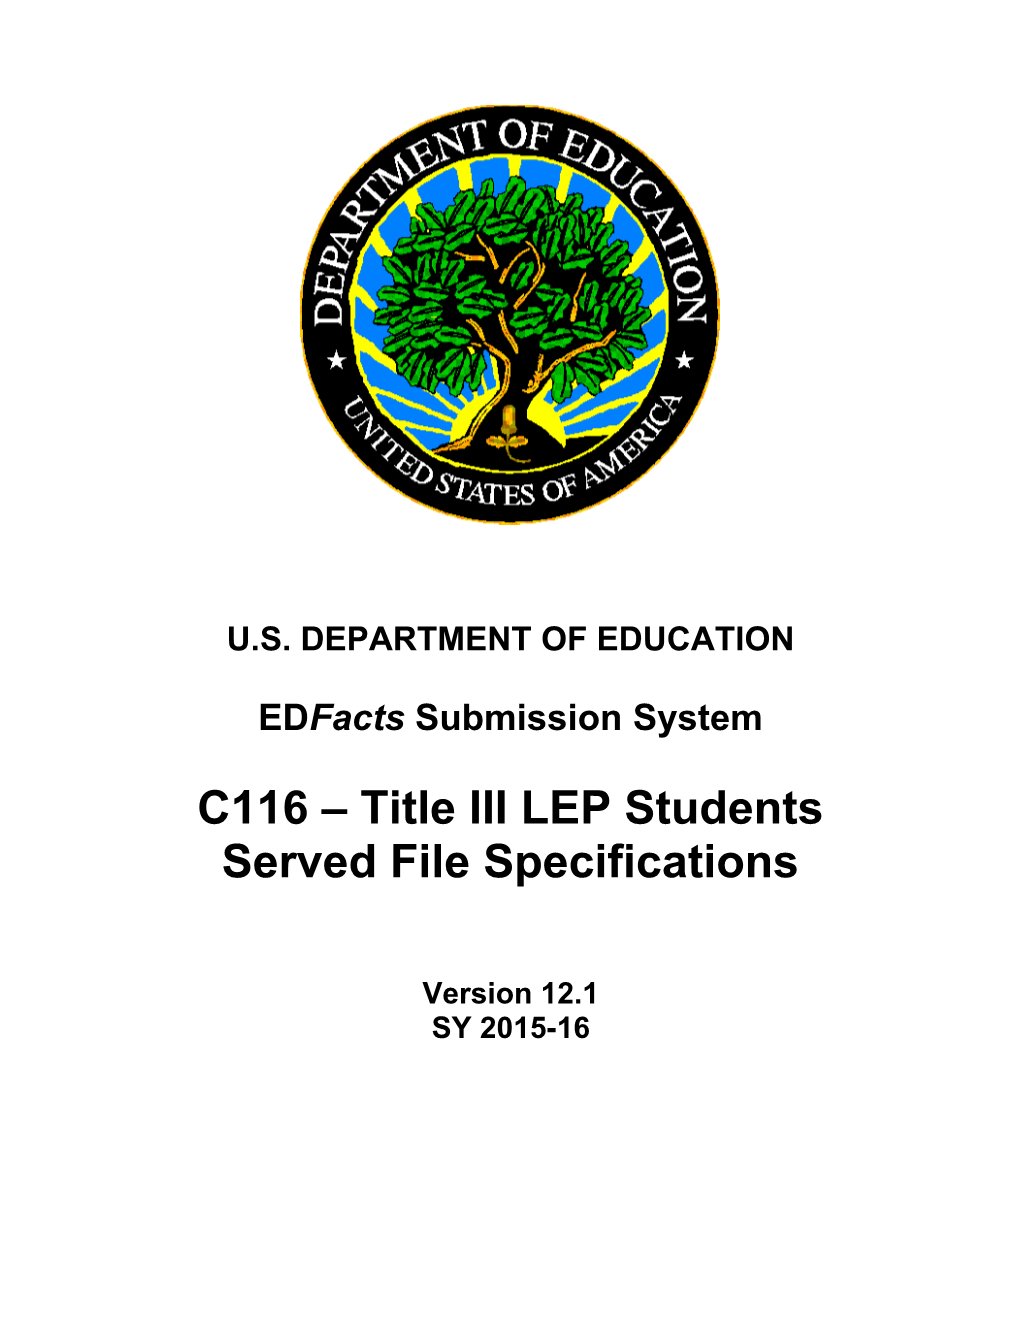 Title III LEP Students Served File Specifications (Msword)